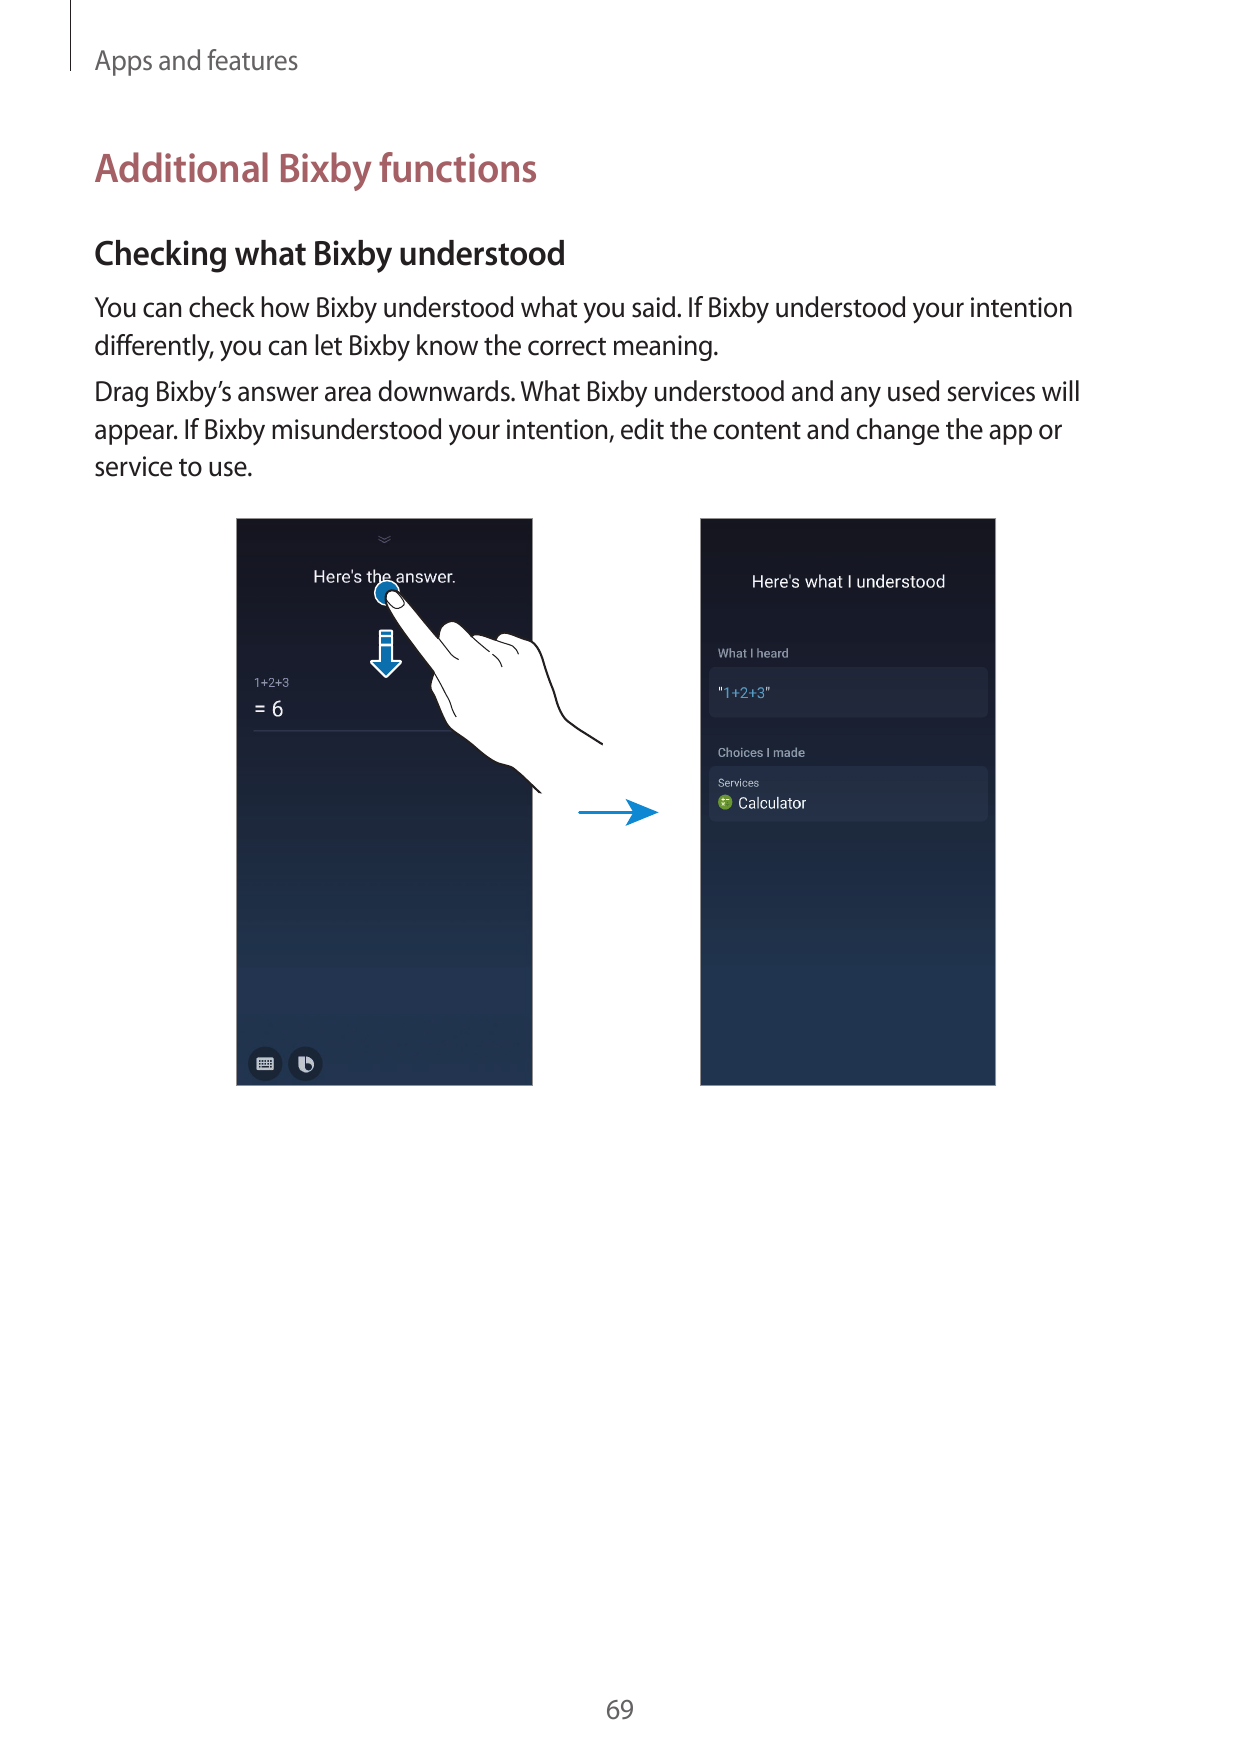 Apps and featuresAdditional Bixby functionsChecking what Bixby understoodYou can check how Bixby understood what you said. If Bi